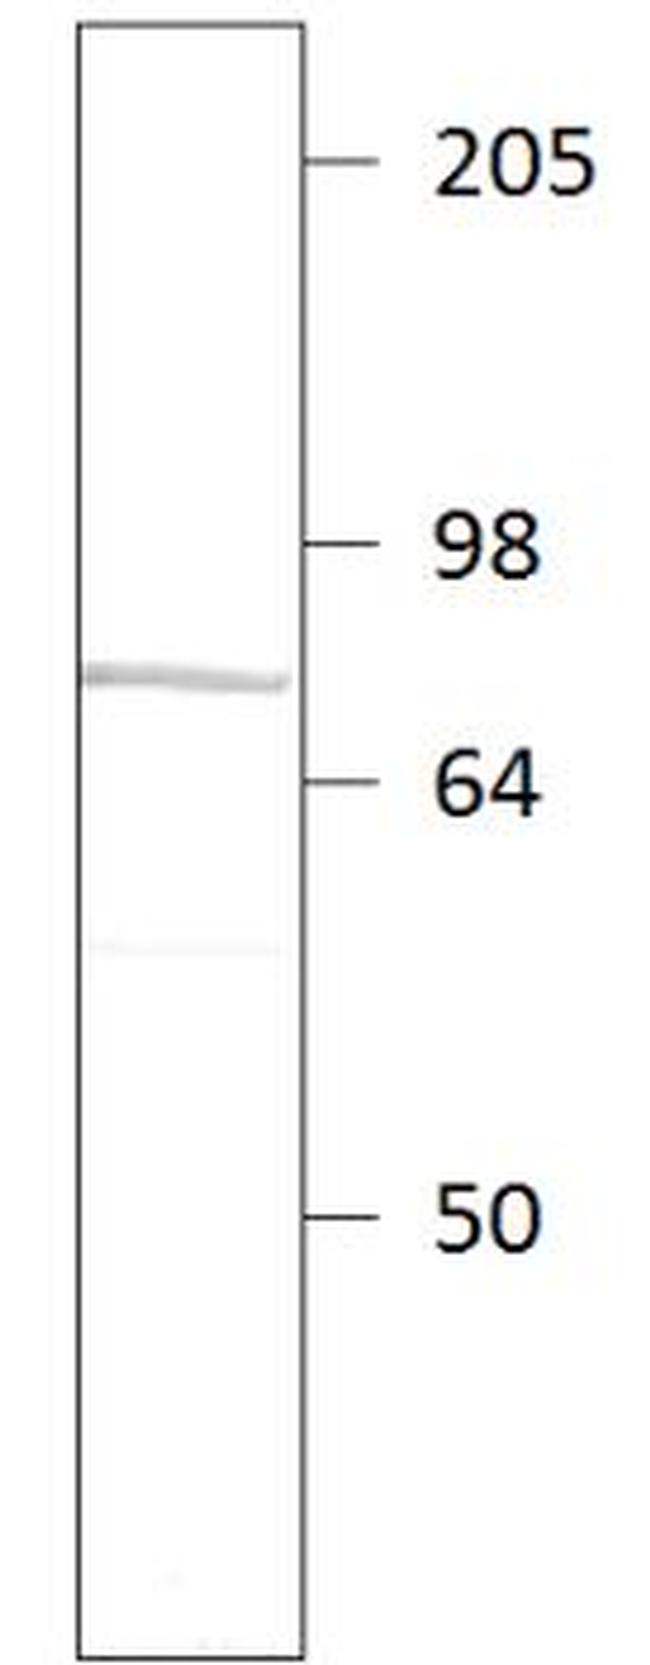 PDE9A Antibody in Western Blot (WB)